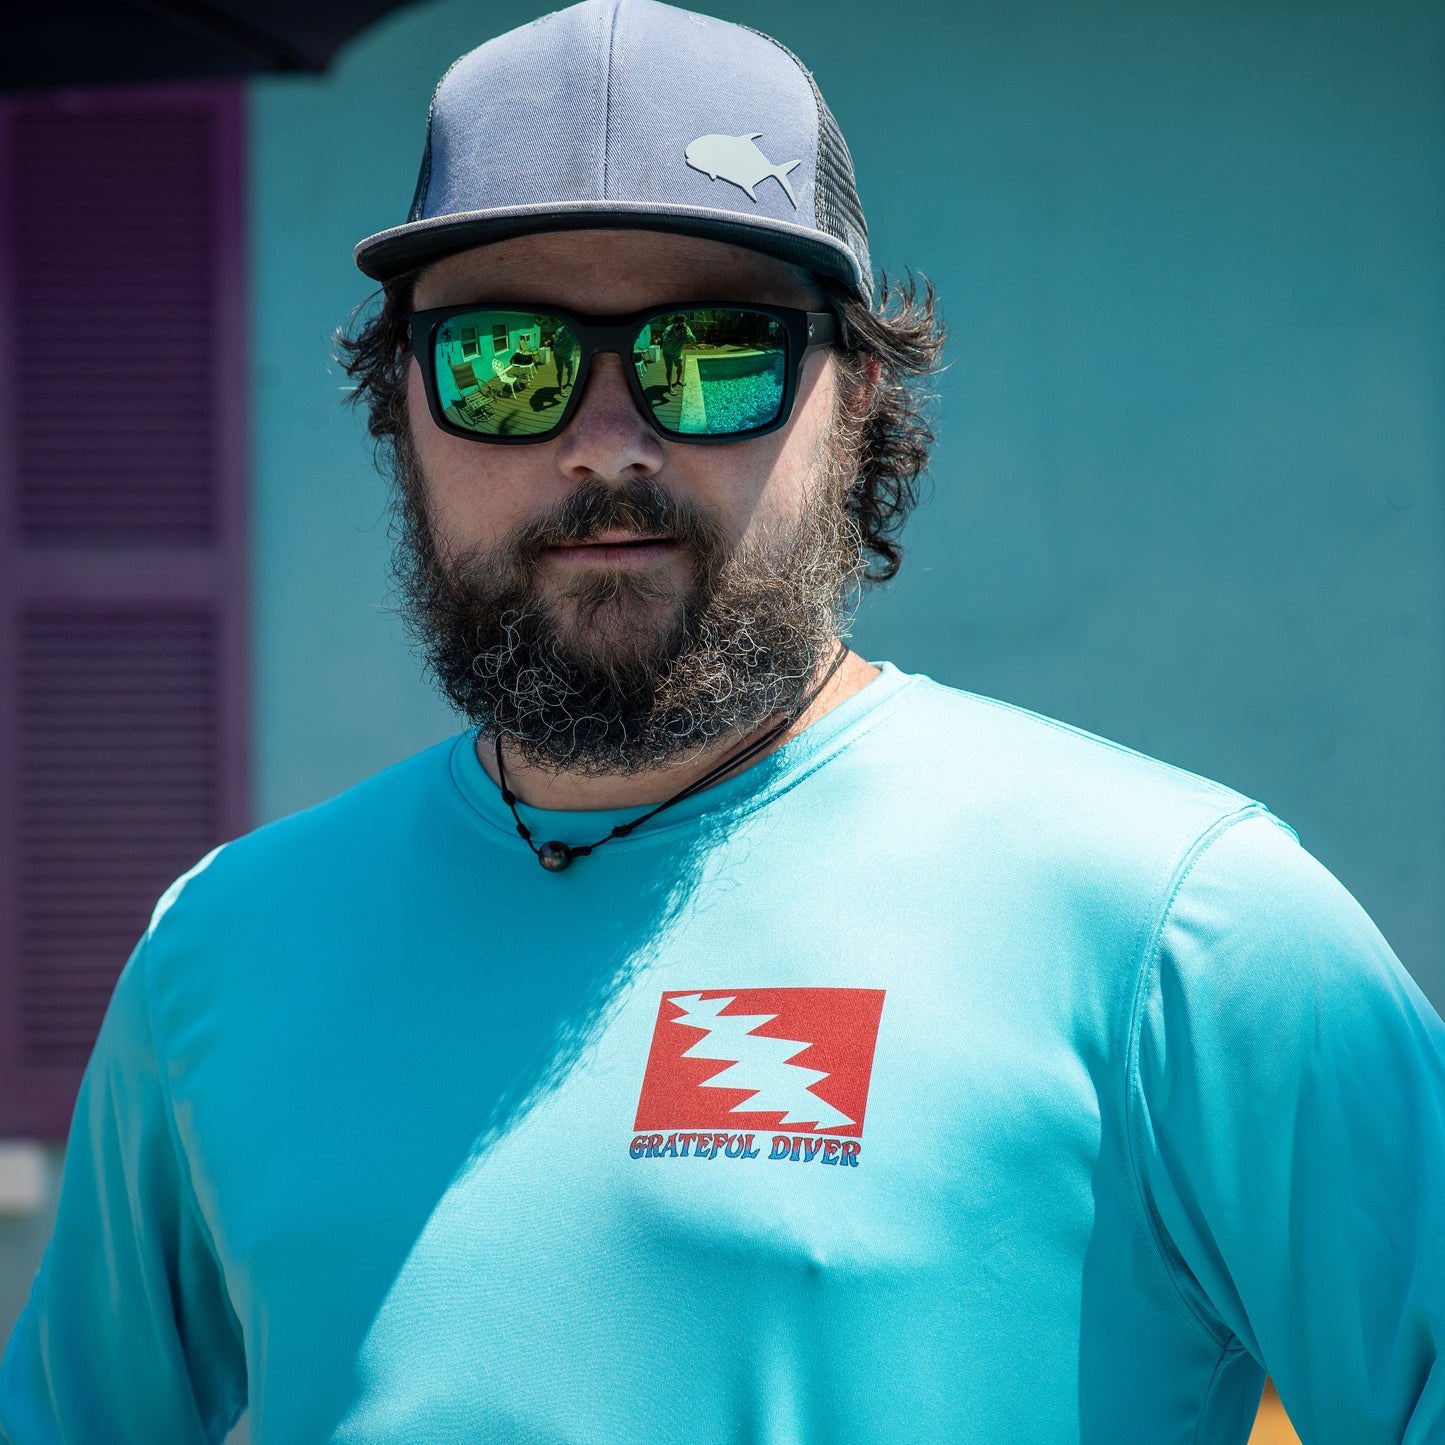 Grateful Diver Reef Diver UV Shirt in water blue on man in a hat and sunglasses showing front lightning bolt logo with the building in the background